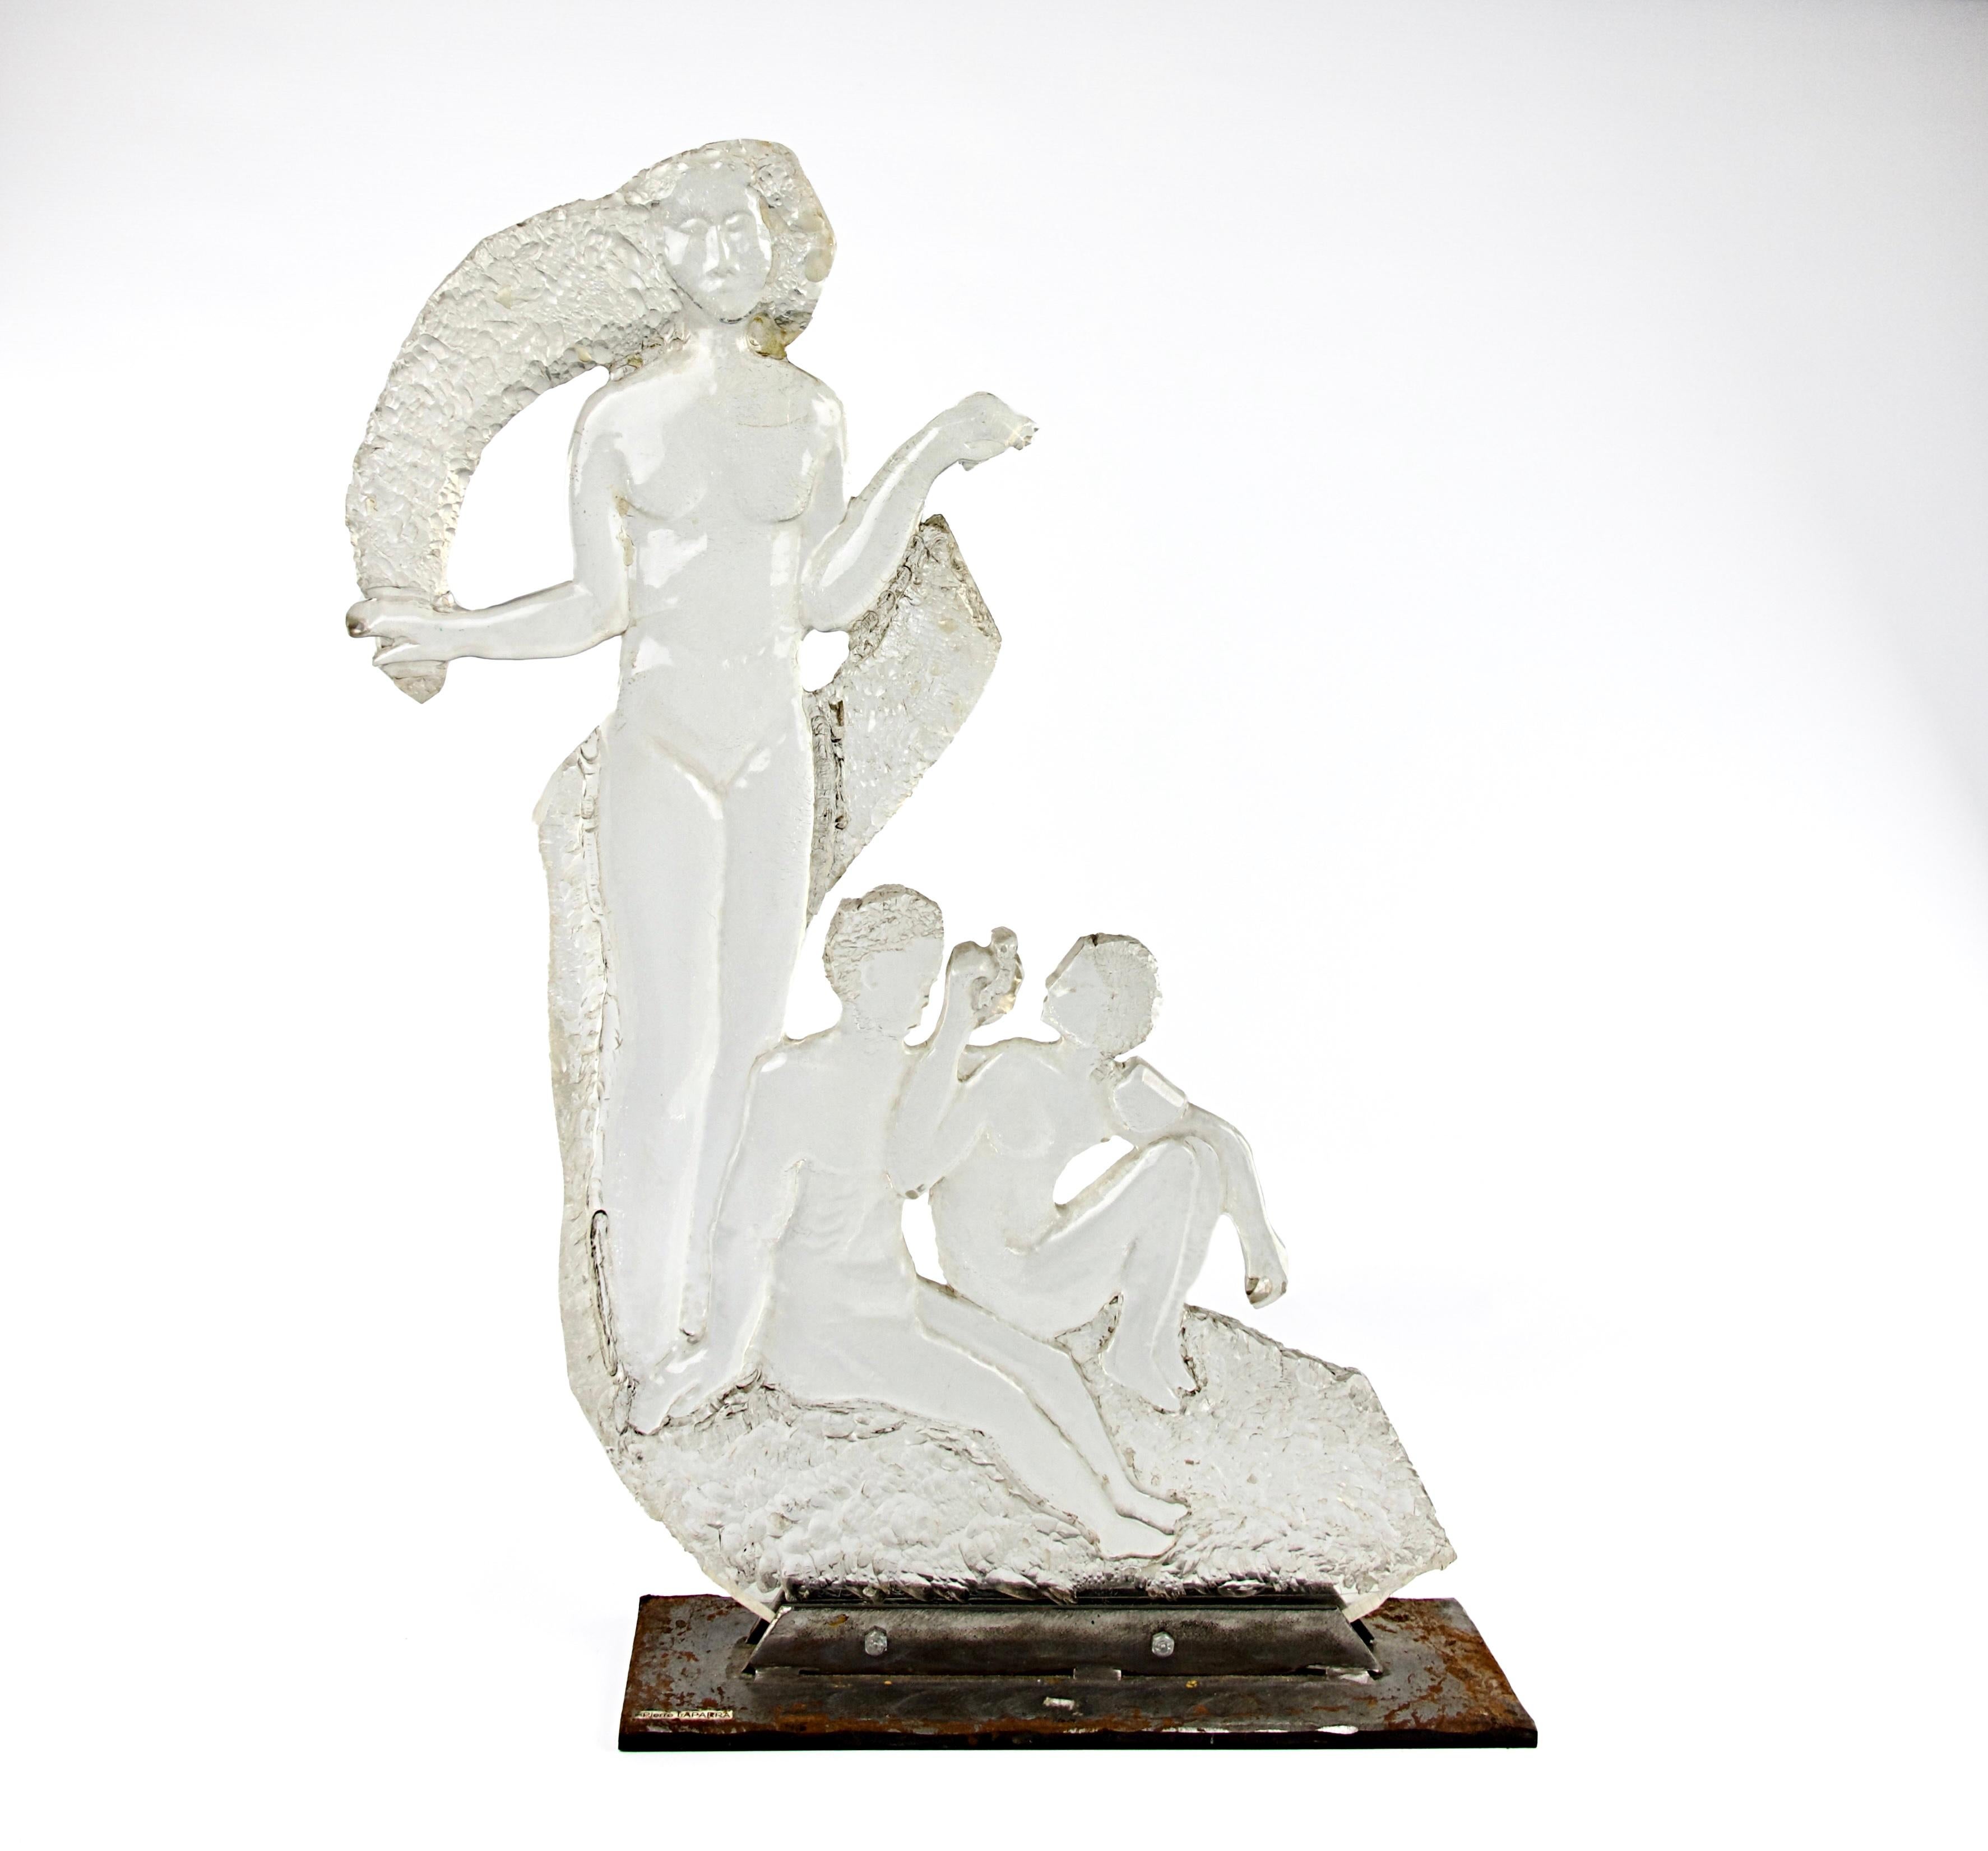 Superb 1970s modernist romantic style sculpture depicting a nude woman and two children by the artist Pierre Laparra. Sculpted plexiglas mounted on a metal base. 

In good condition. Some small signs of use.

Secure shipping.

Dimensions in cm